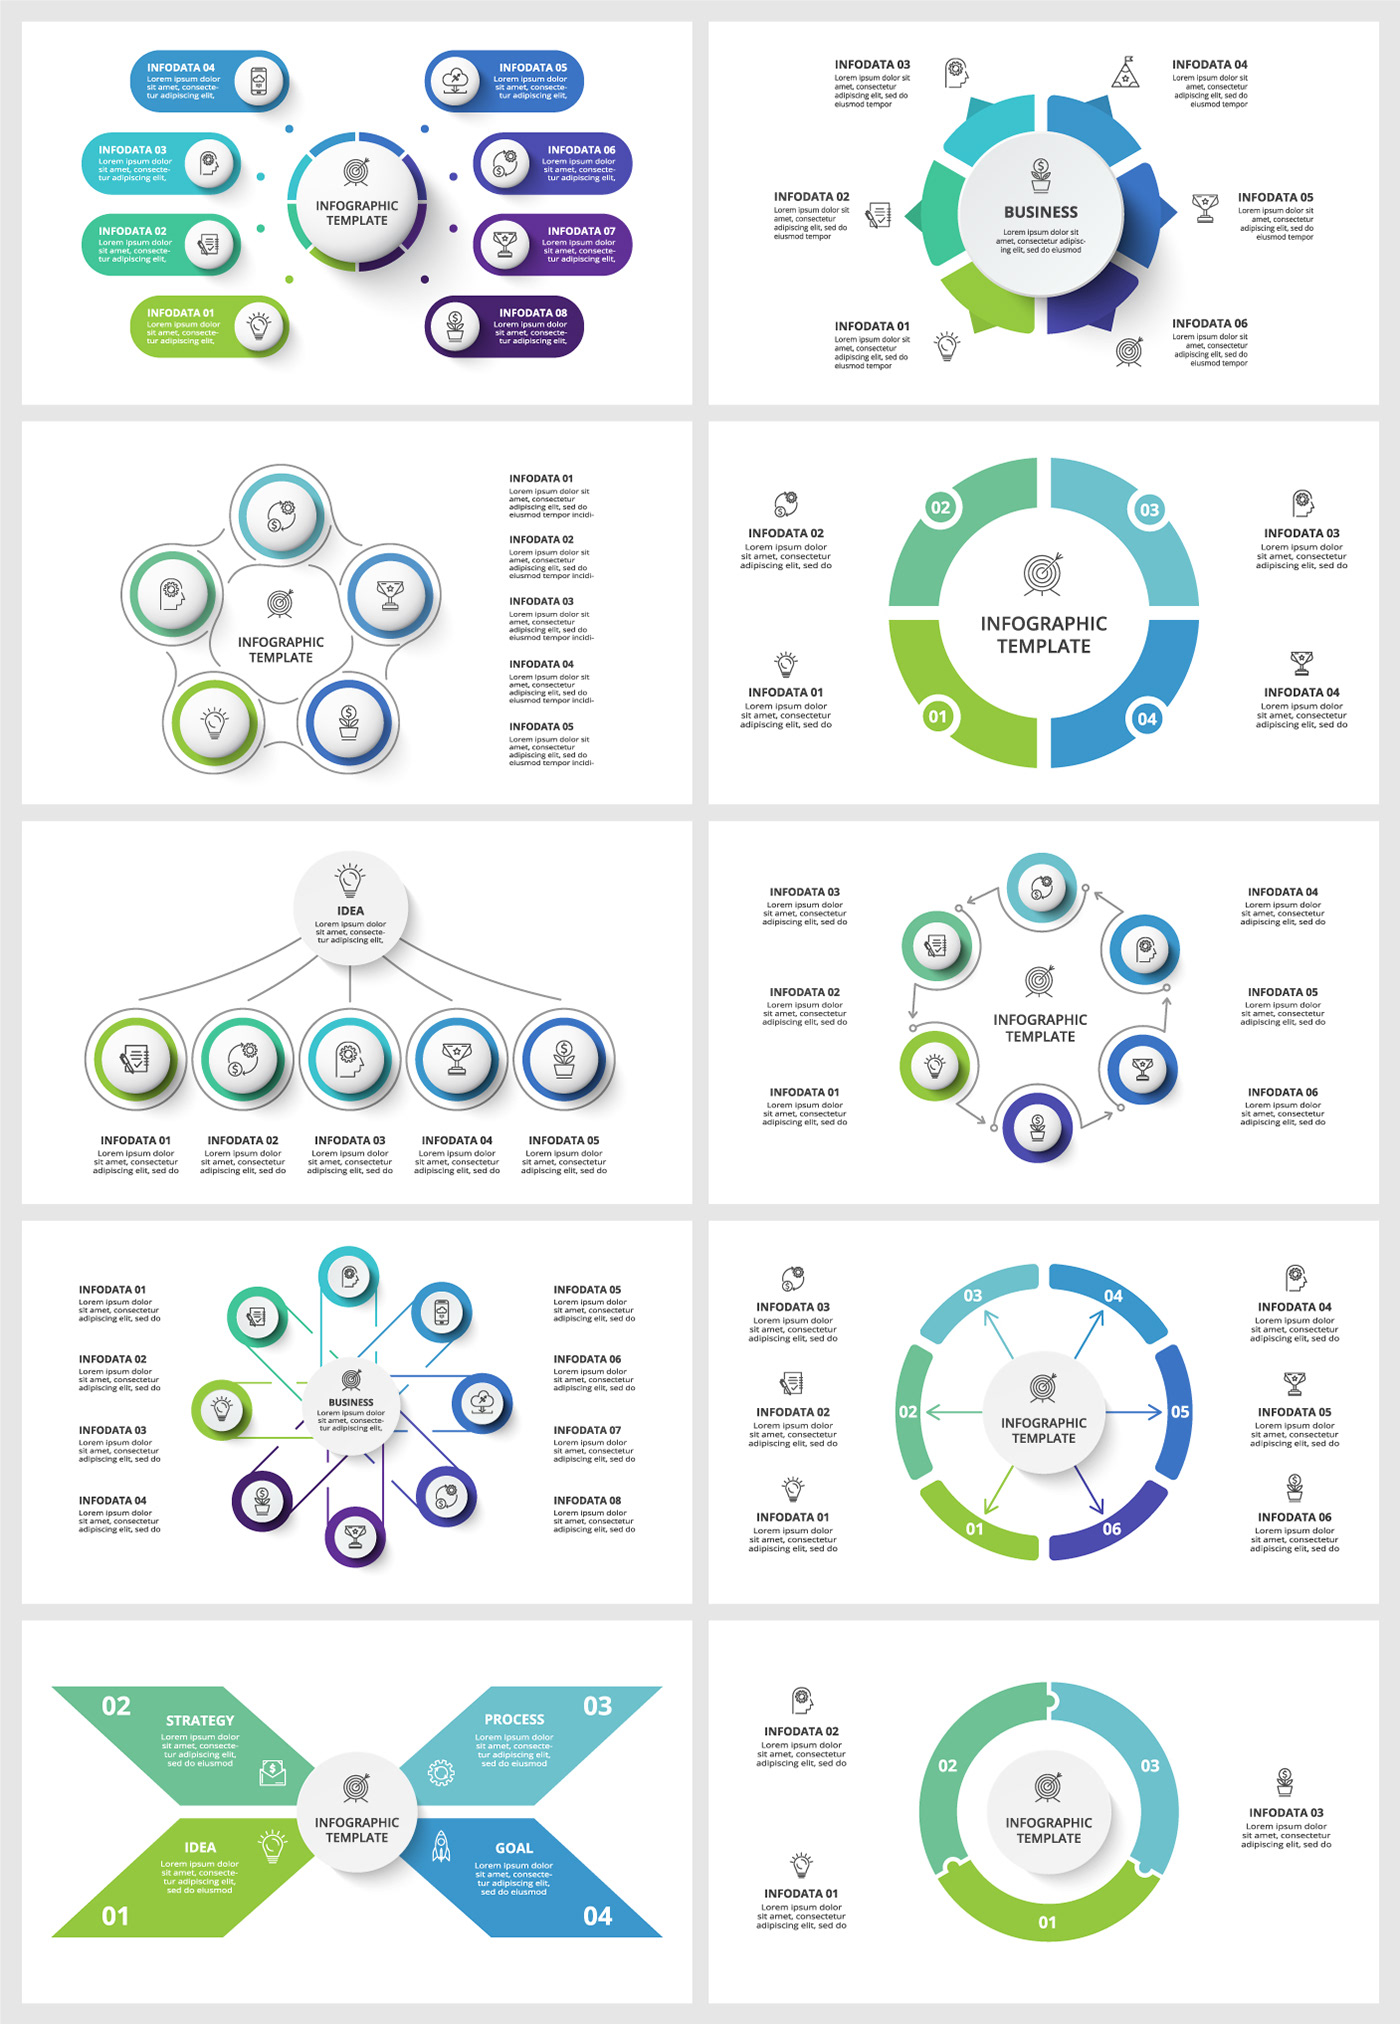 animated Layout map neumorphism Powerpoint presentation slide template timeline infographic